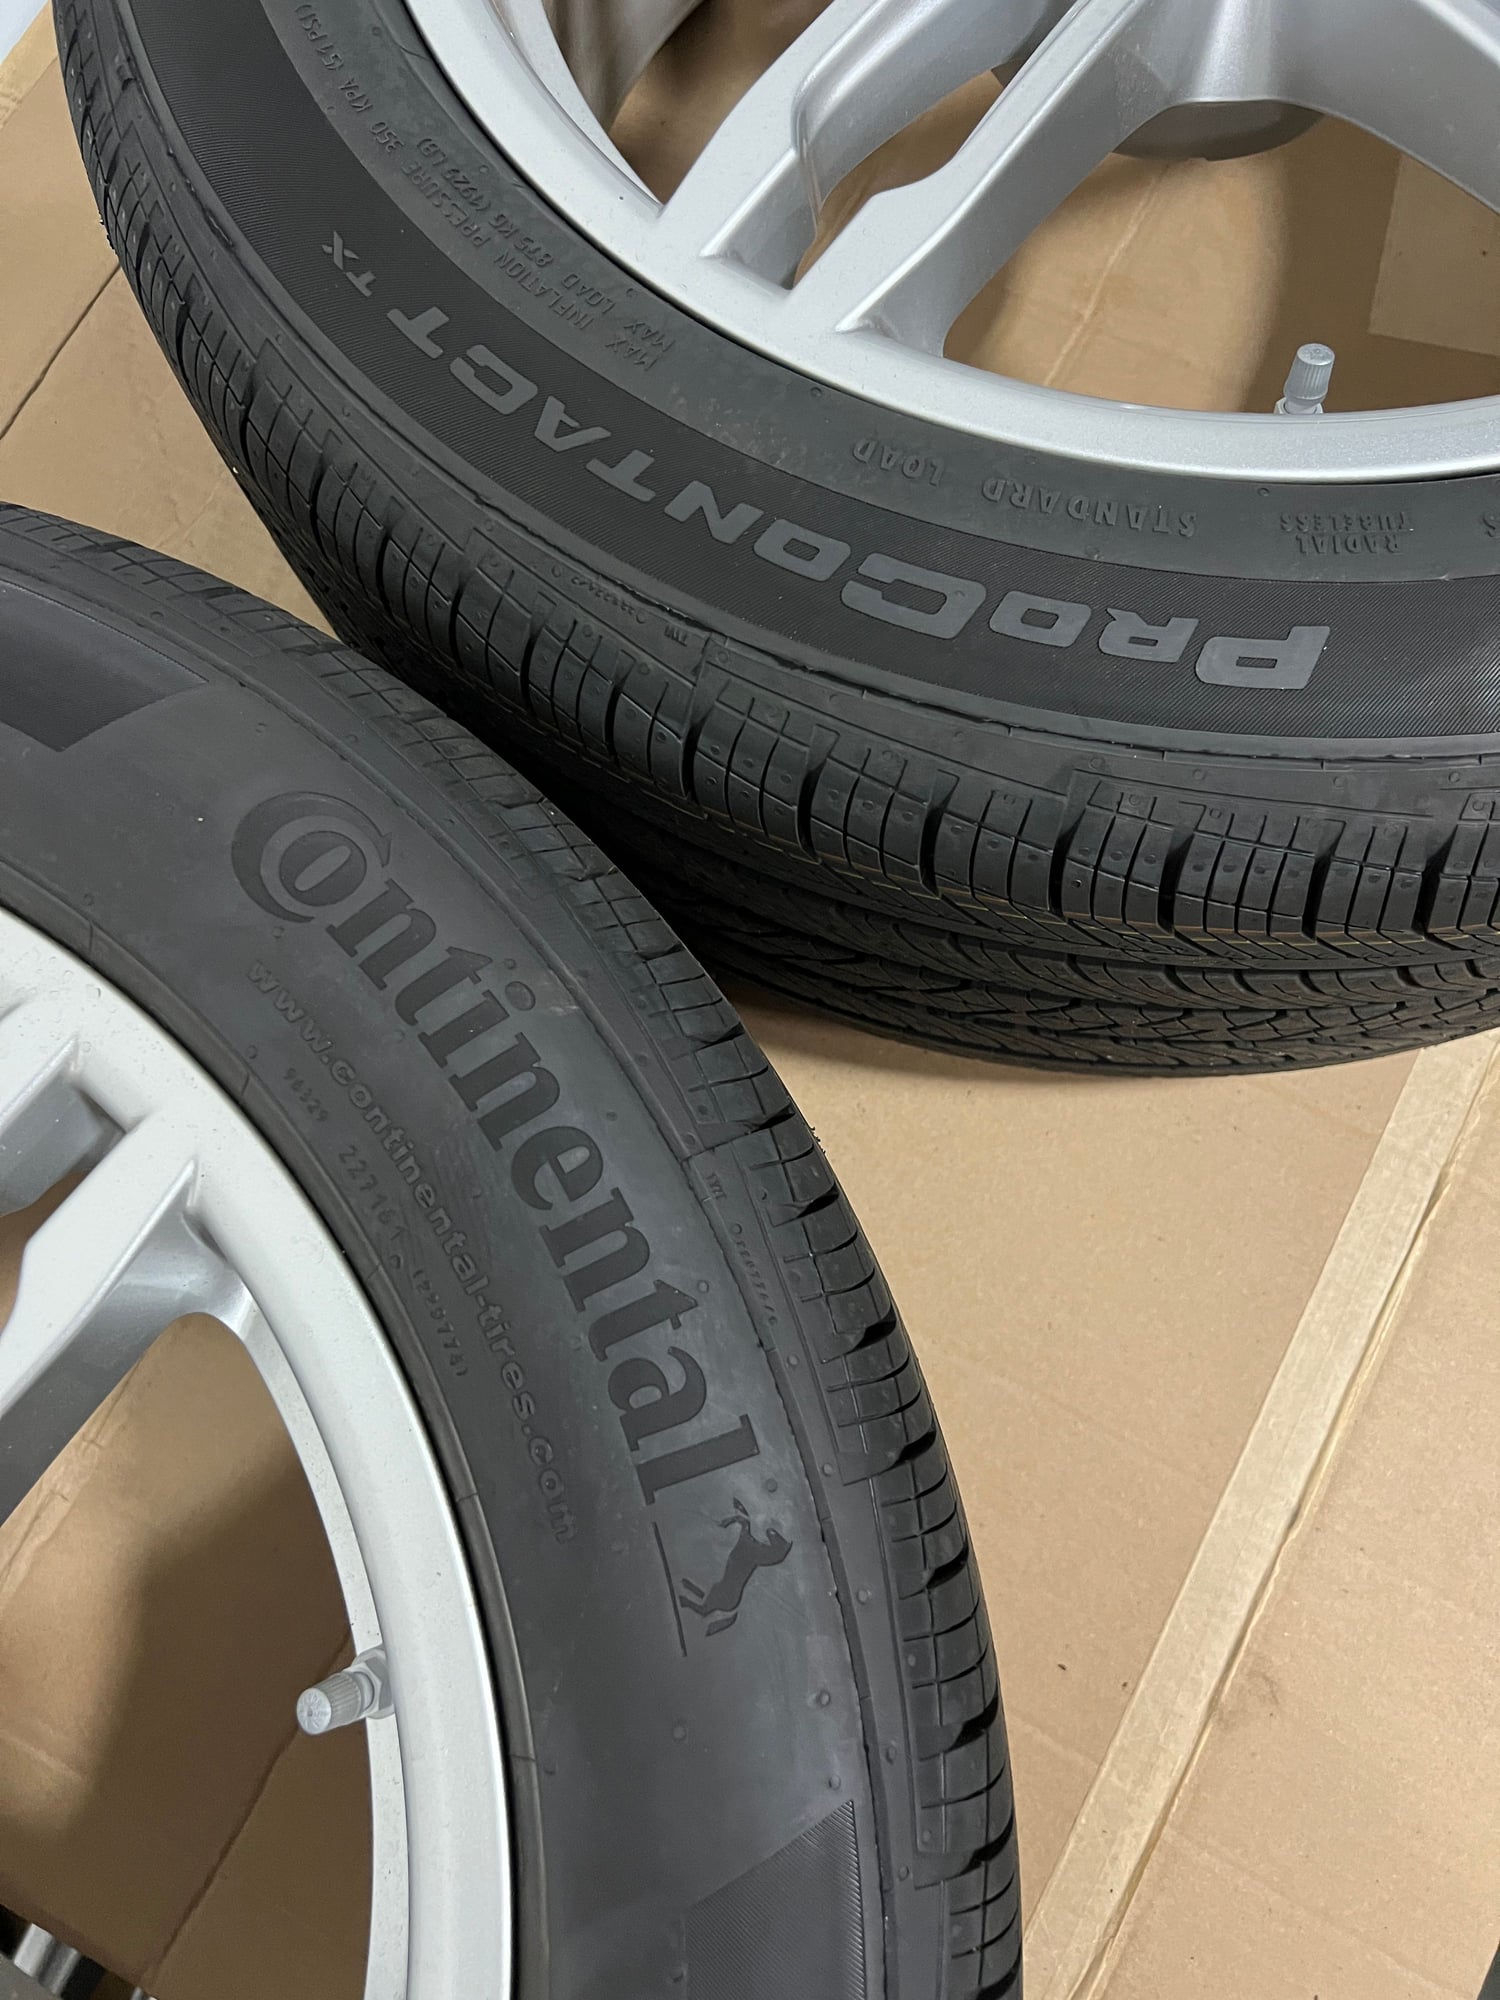 Wheels and Tires/Axles - 2022 Porsche Macan NEW Take-Off Wheels & Tires - New - 2022 Porsche Macan - Ft Lauderdale, FL 33025, United States